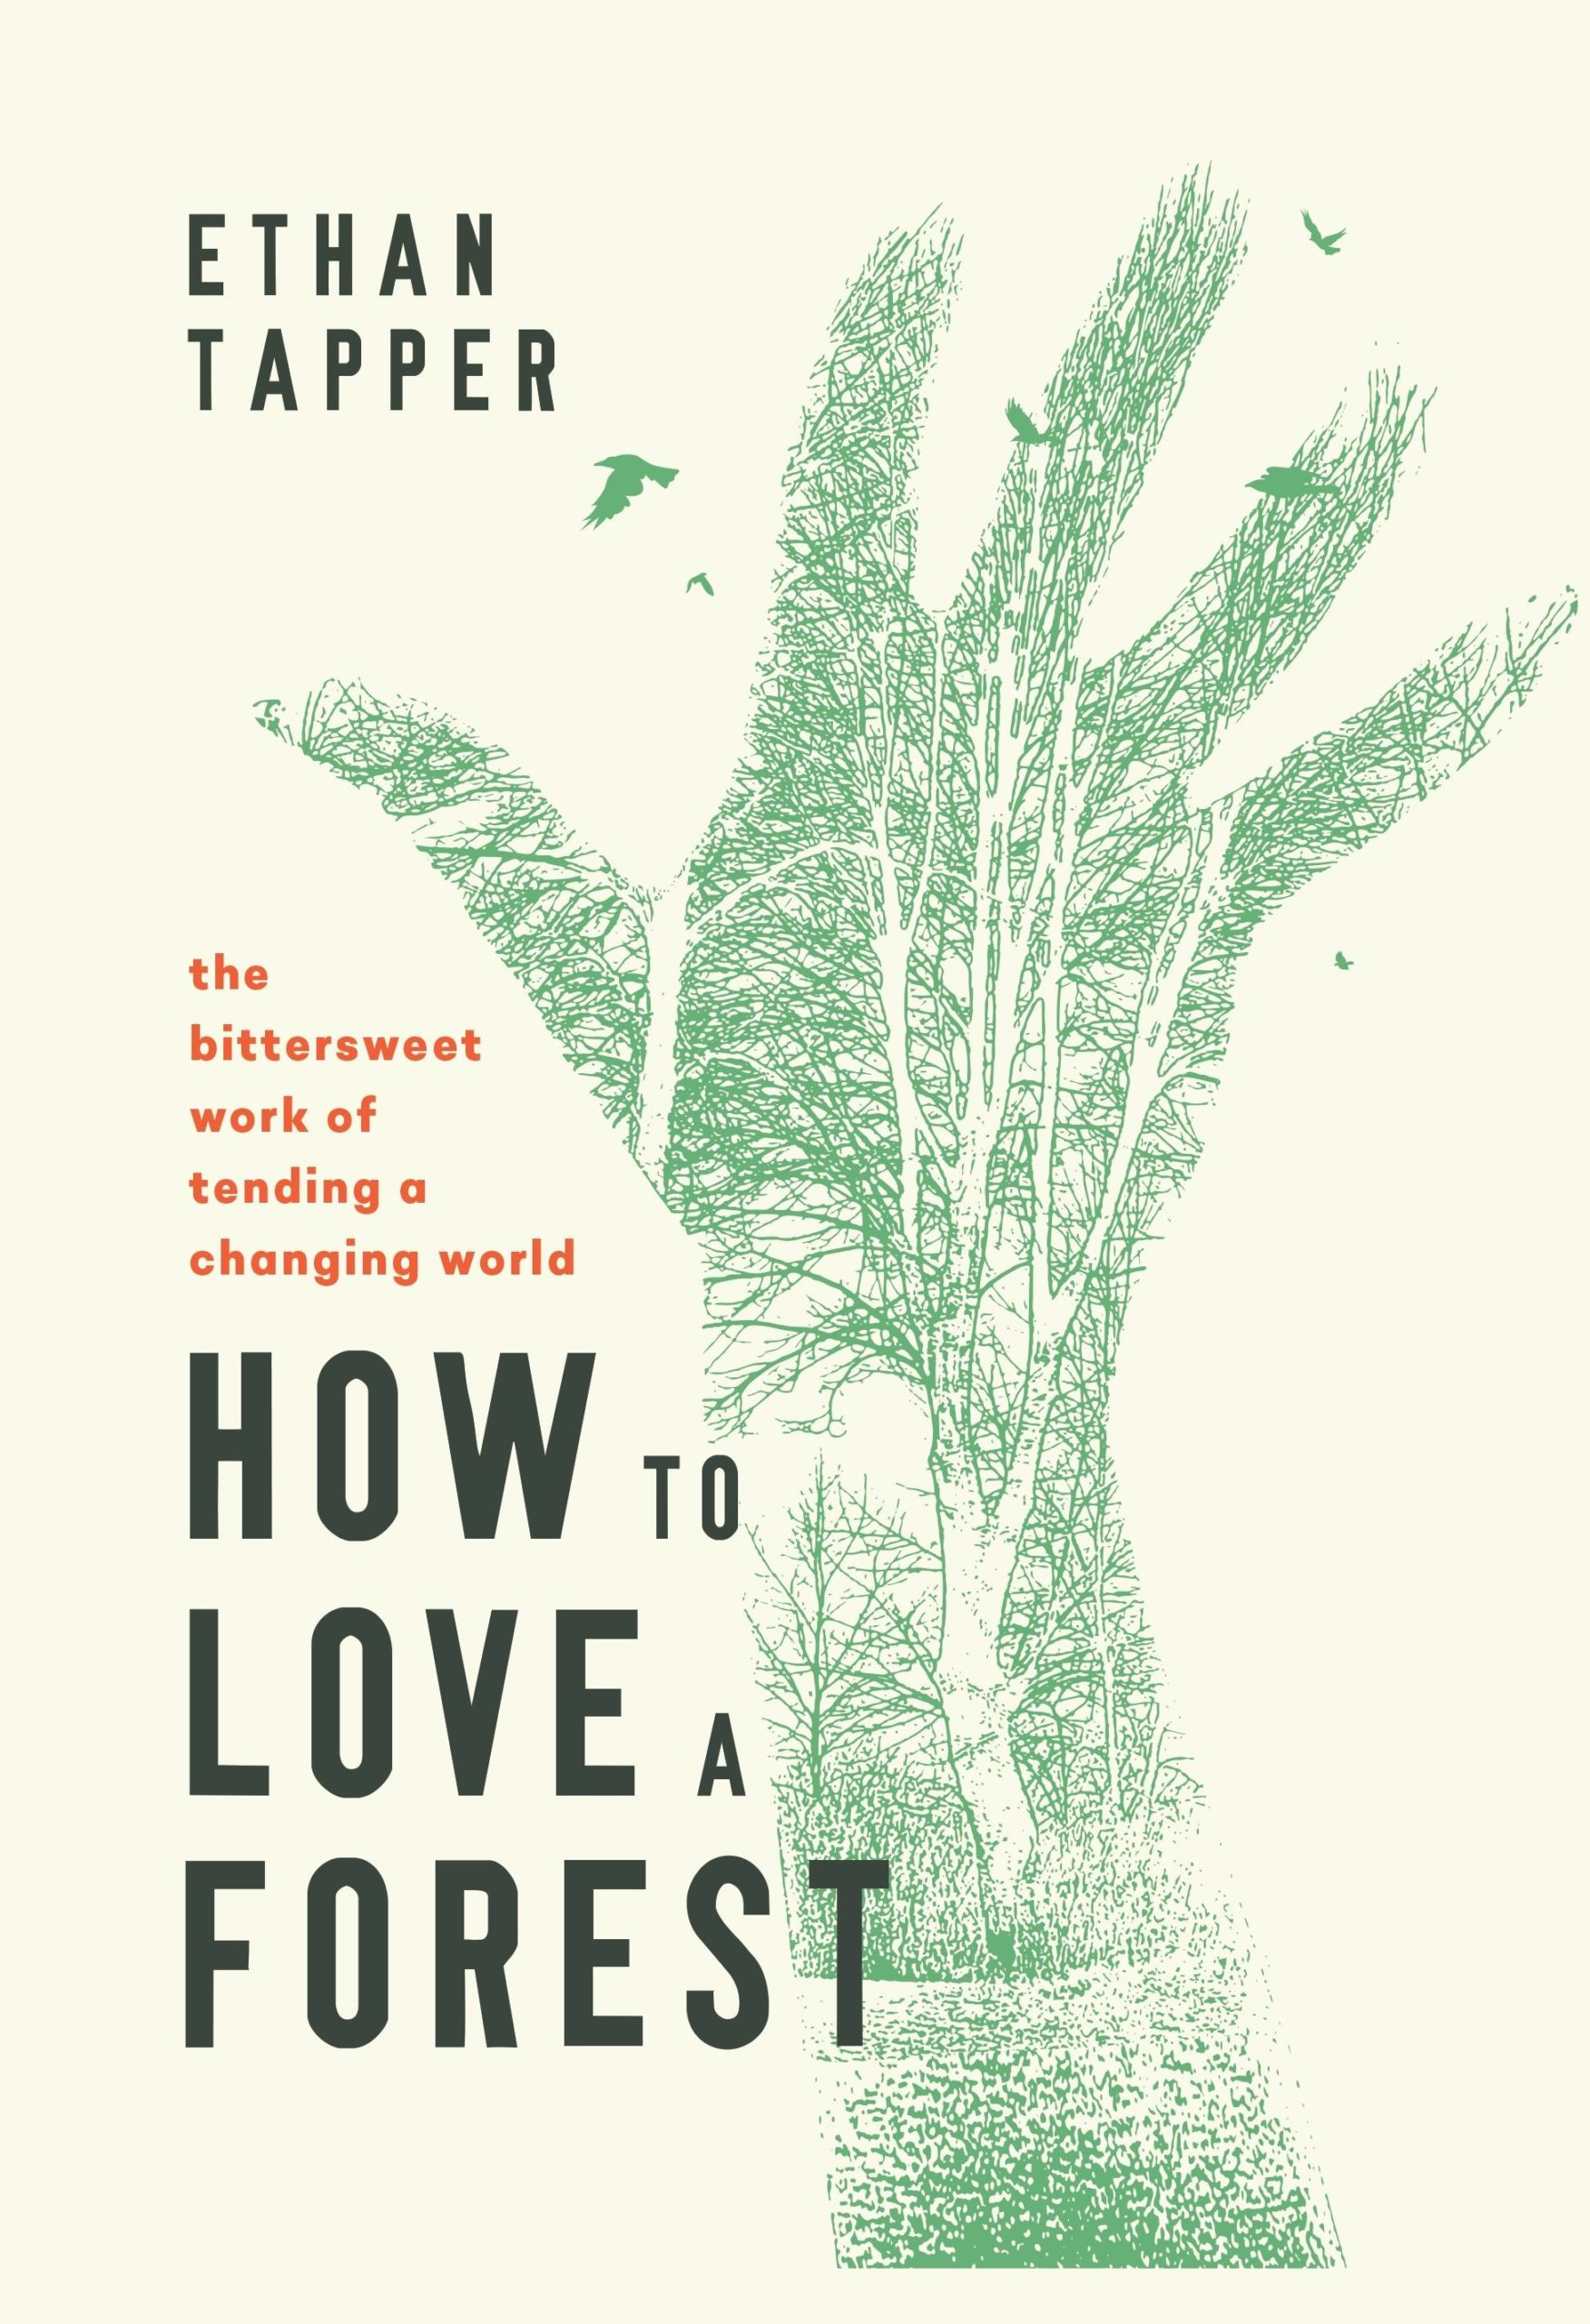 Photo of the cover of the book How to Love a Forest, by Ethan Tapper